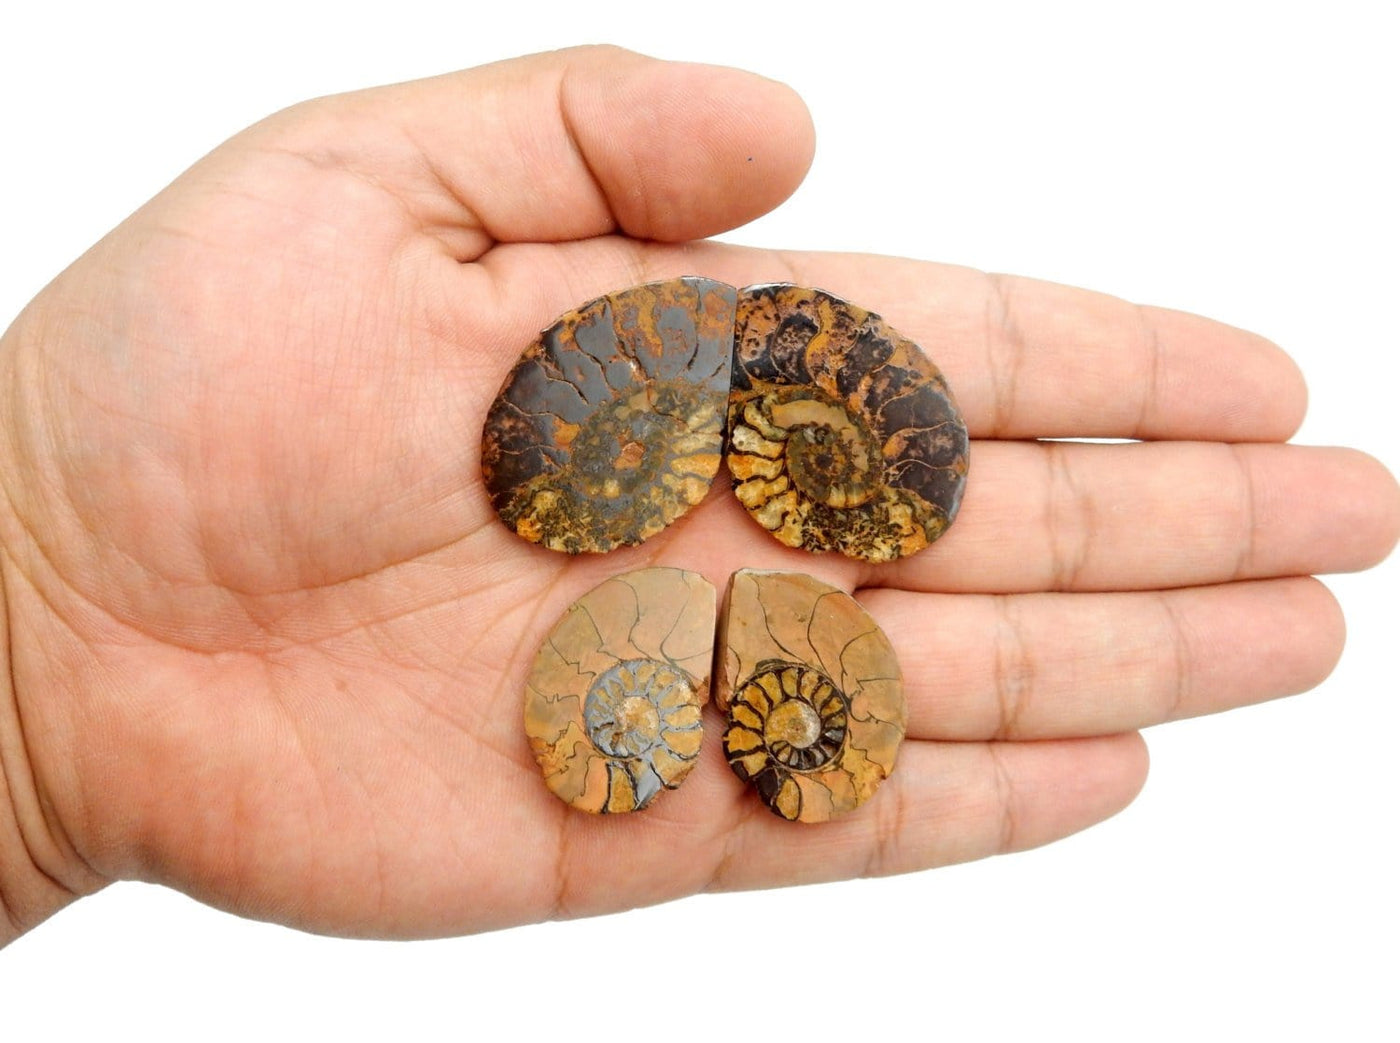 Two Hematite Ammonite Fossil Pairs pictured in the palm of a hand.